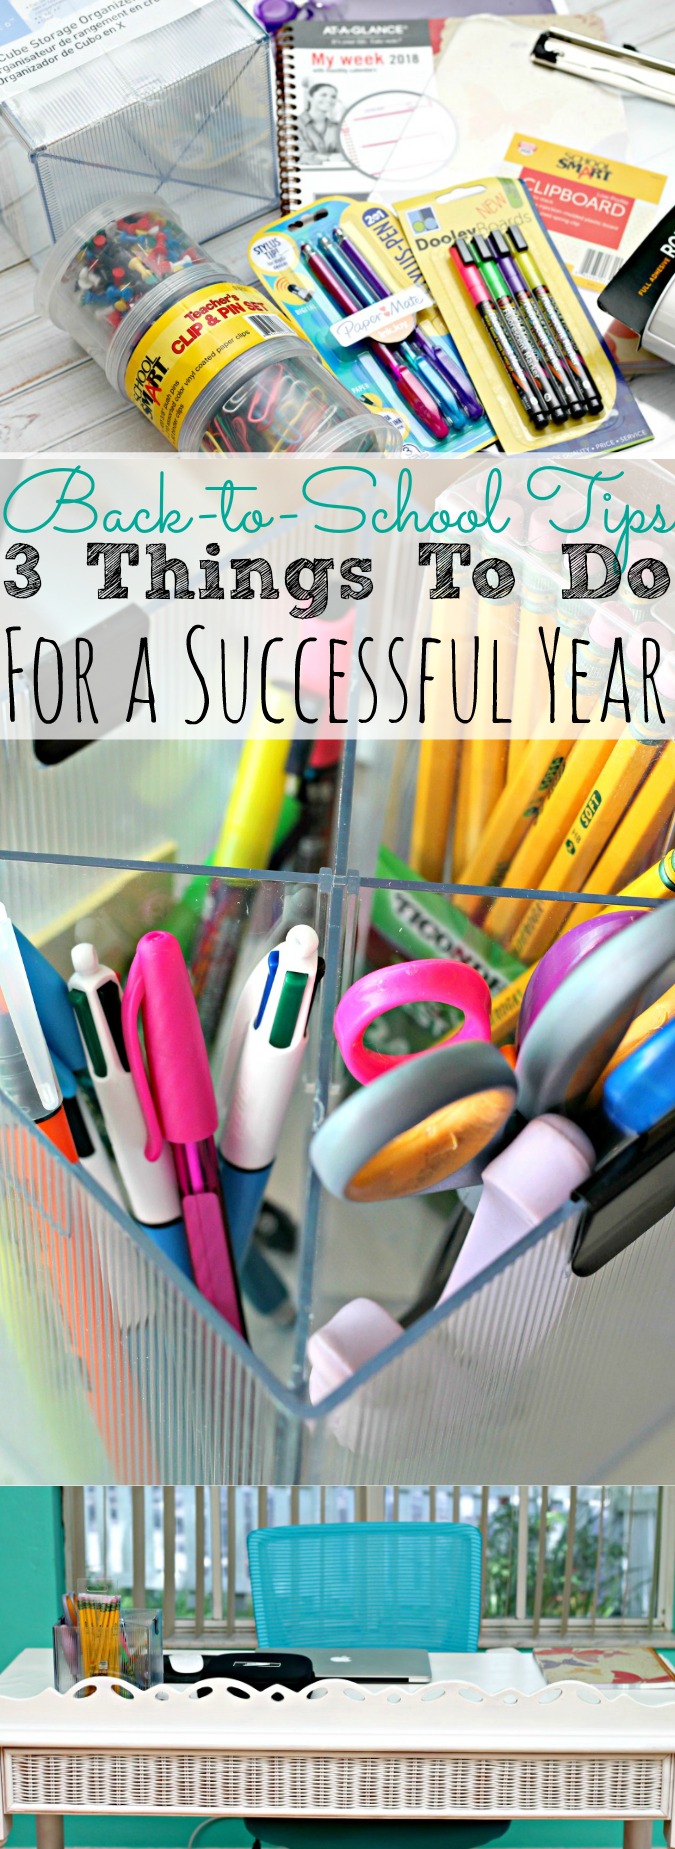 Back To School Tips | 3 Things To Do For A Successful Year - simplytodaylife.com